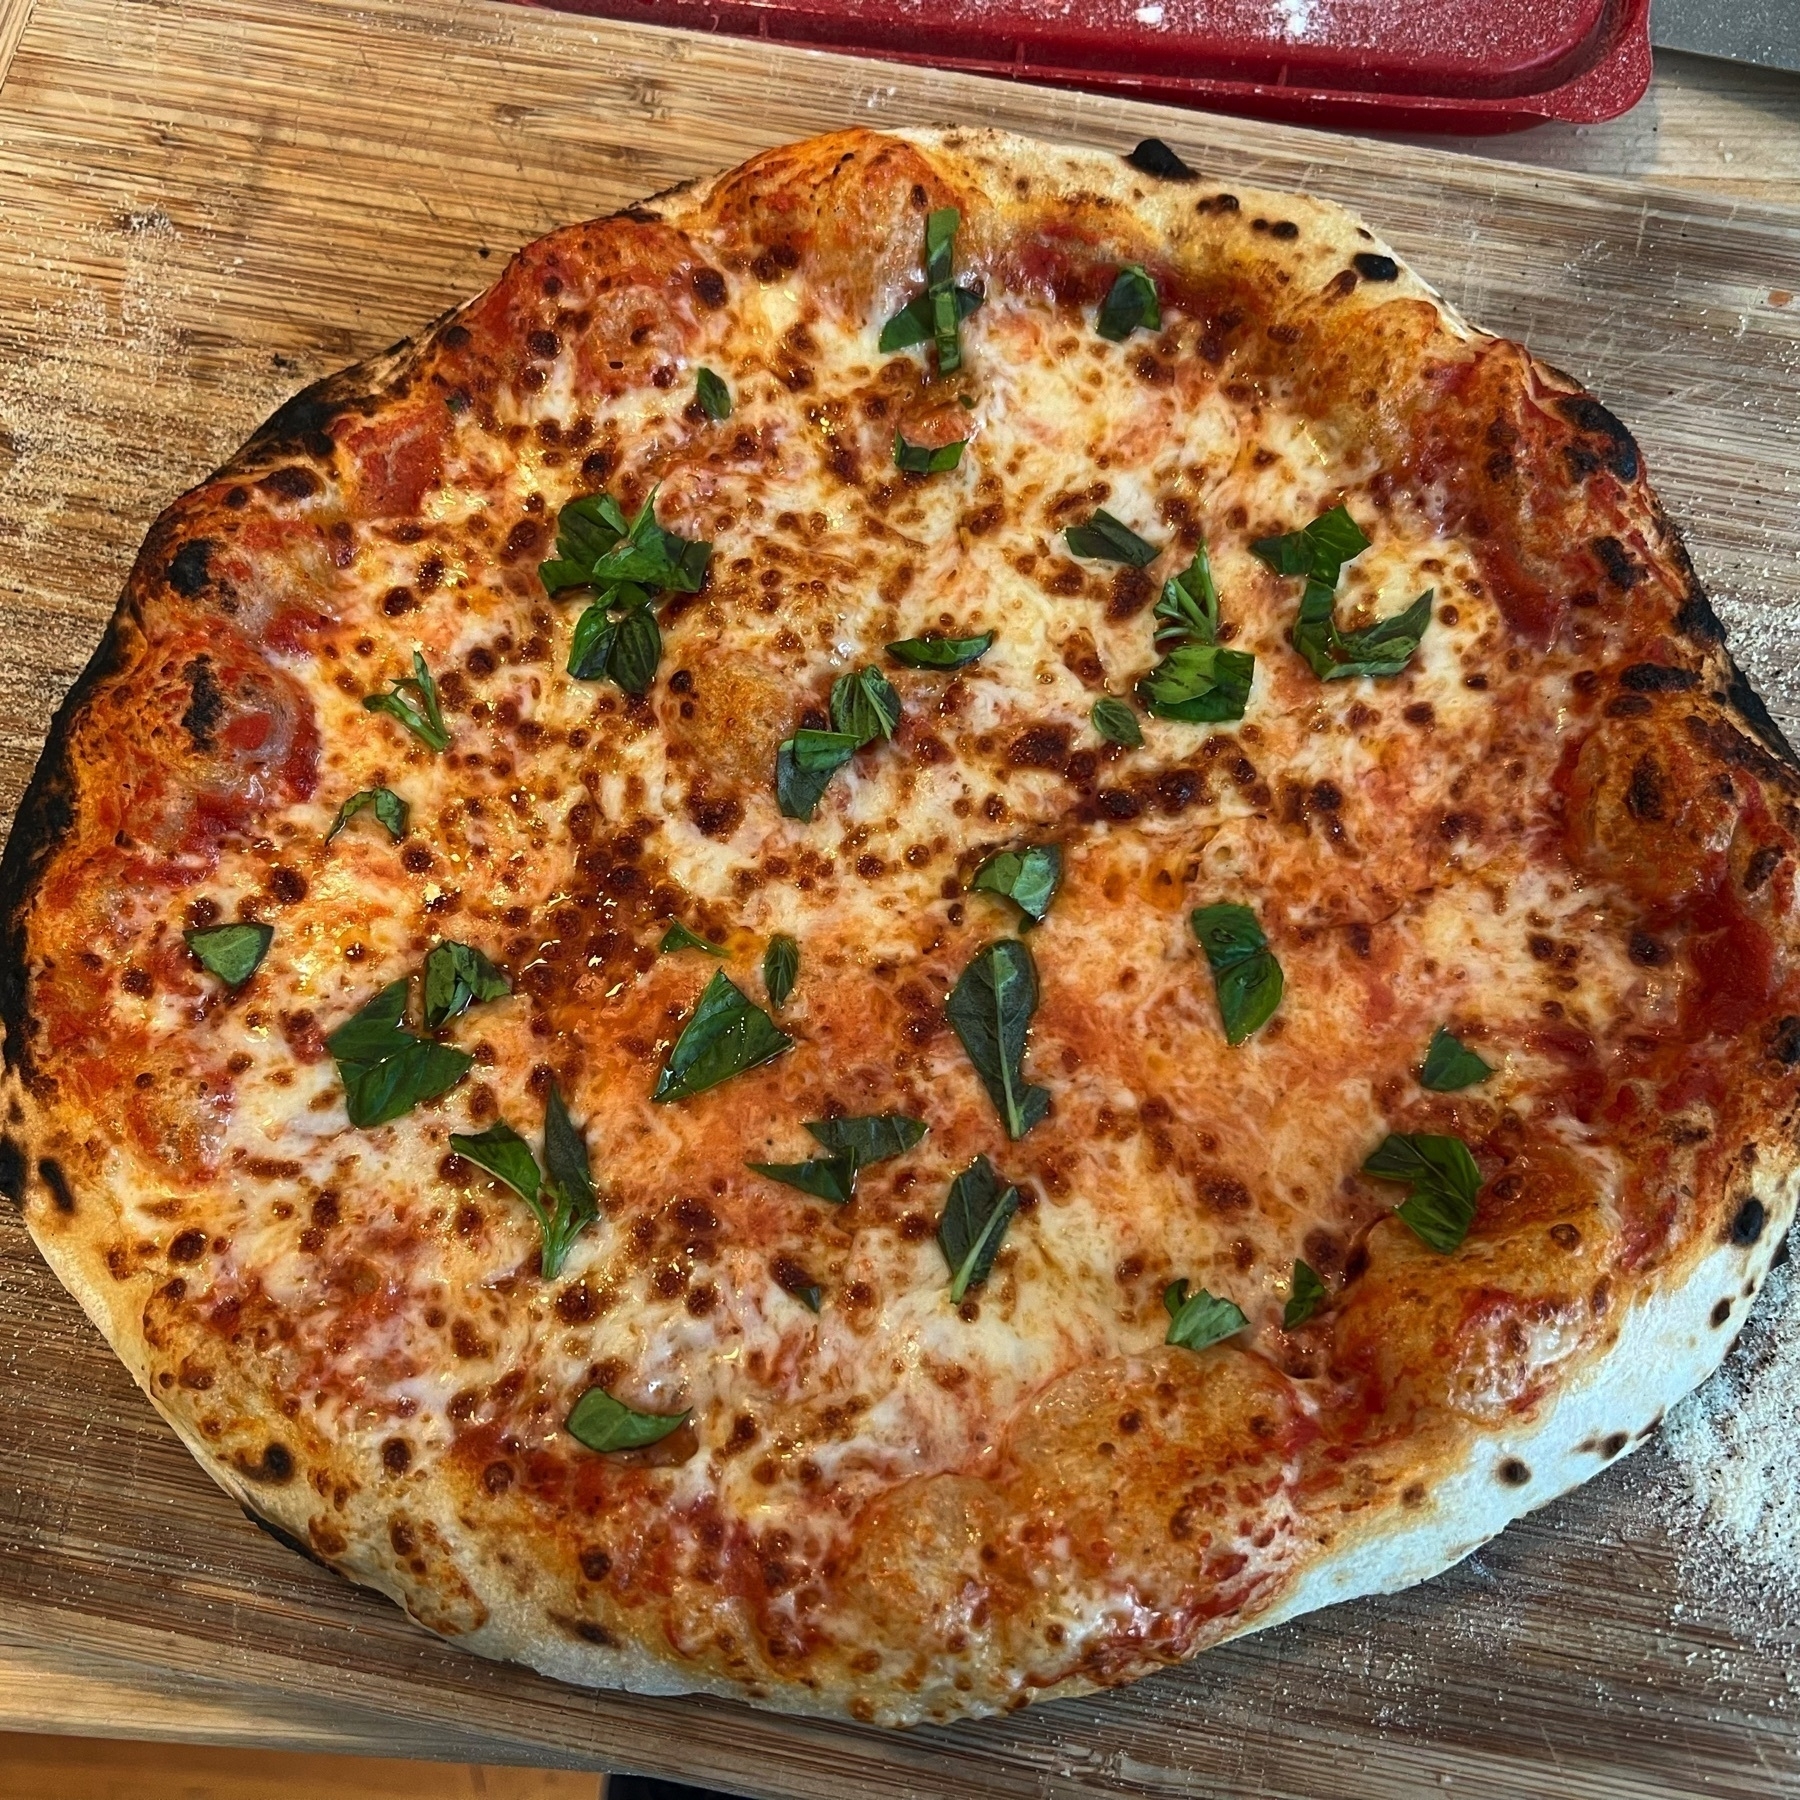 Top-down view of a cheese and basil homemade pizza with charred black edges.